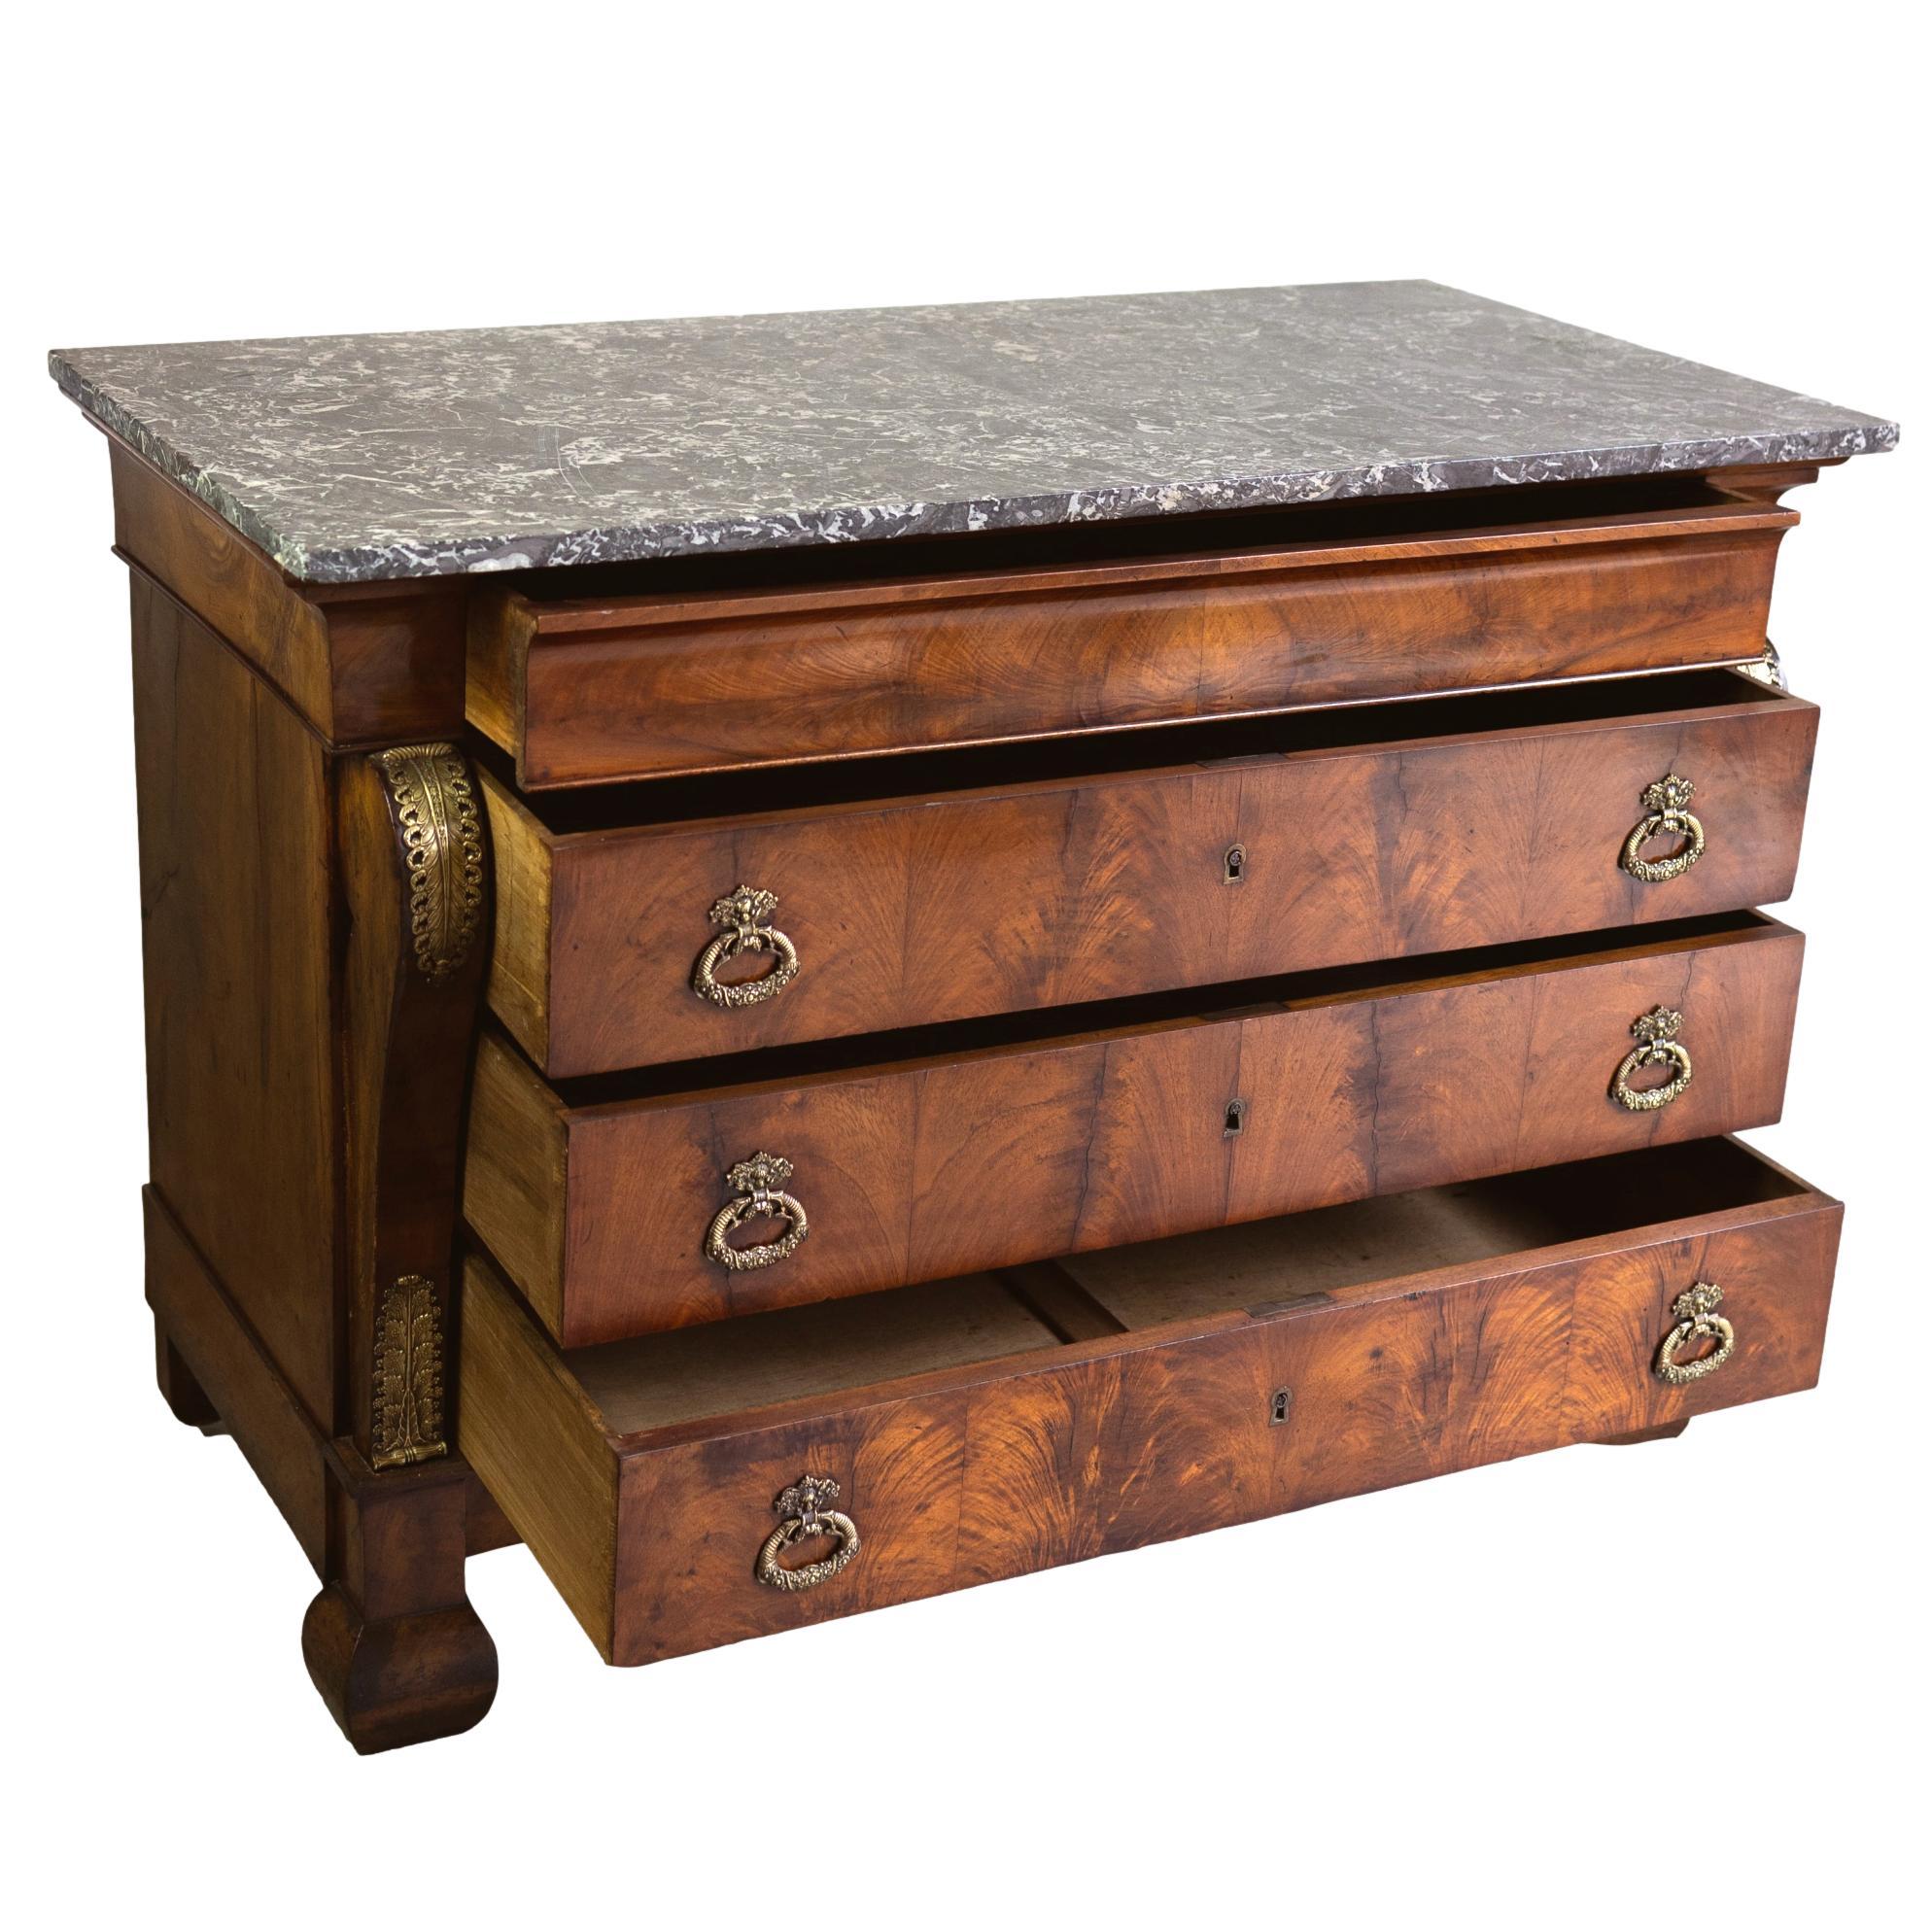 An Empire Ormolu-Mounted Mahogany Commode, Marble Top, French, ca. 1820 In Good Condition For Sale In Banner Elk, NC